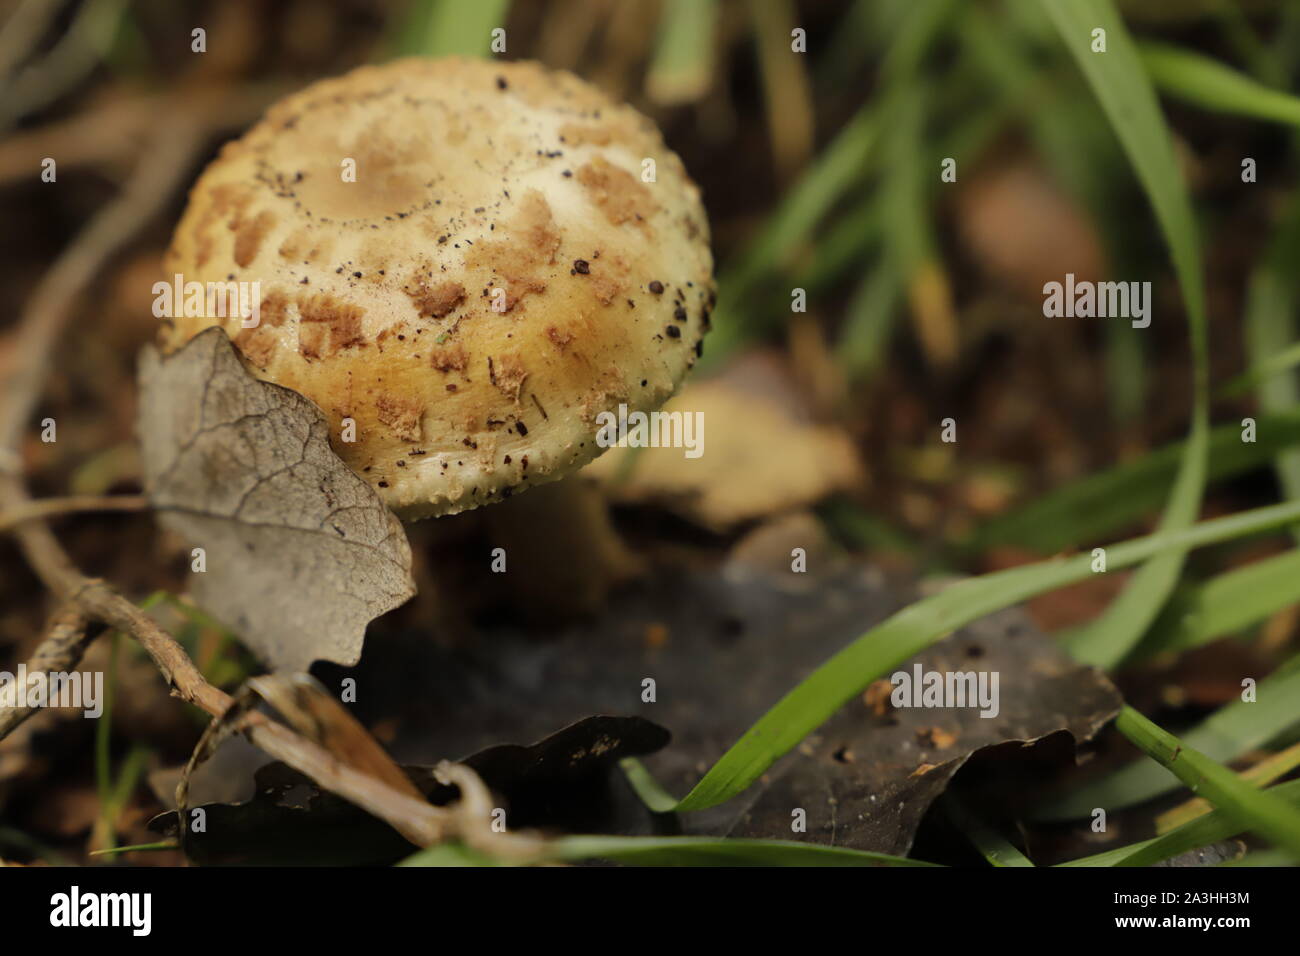 freckled dapperling is a common mushroom Stock Photo